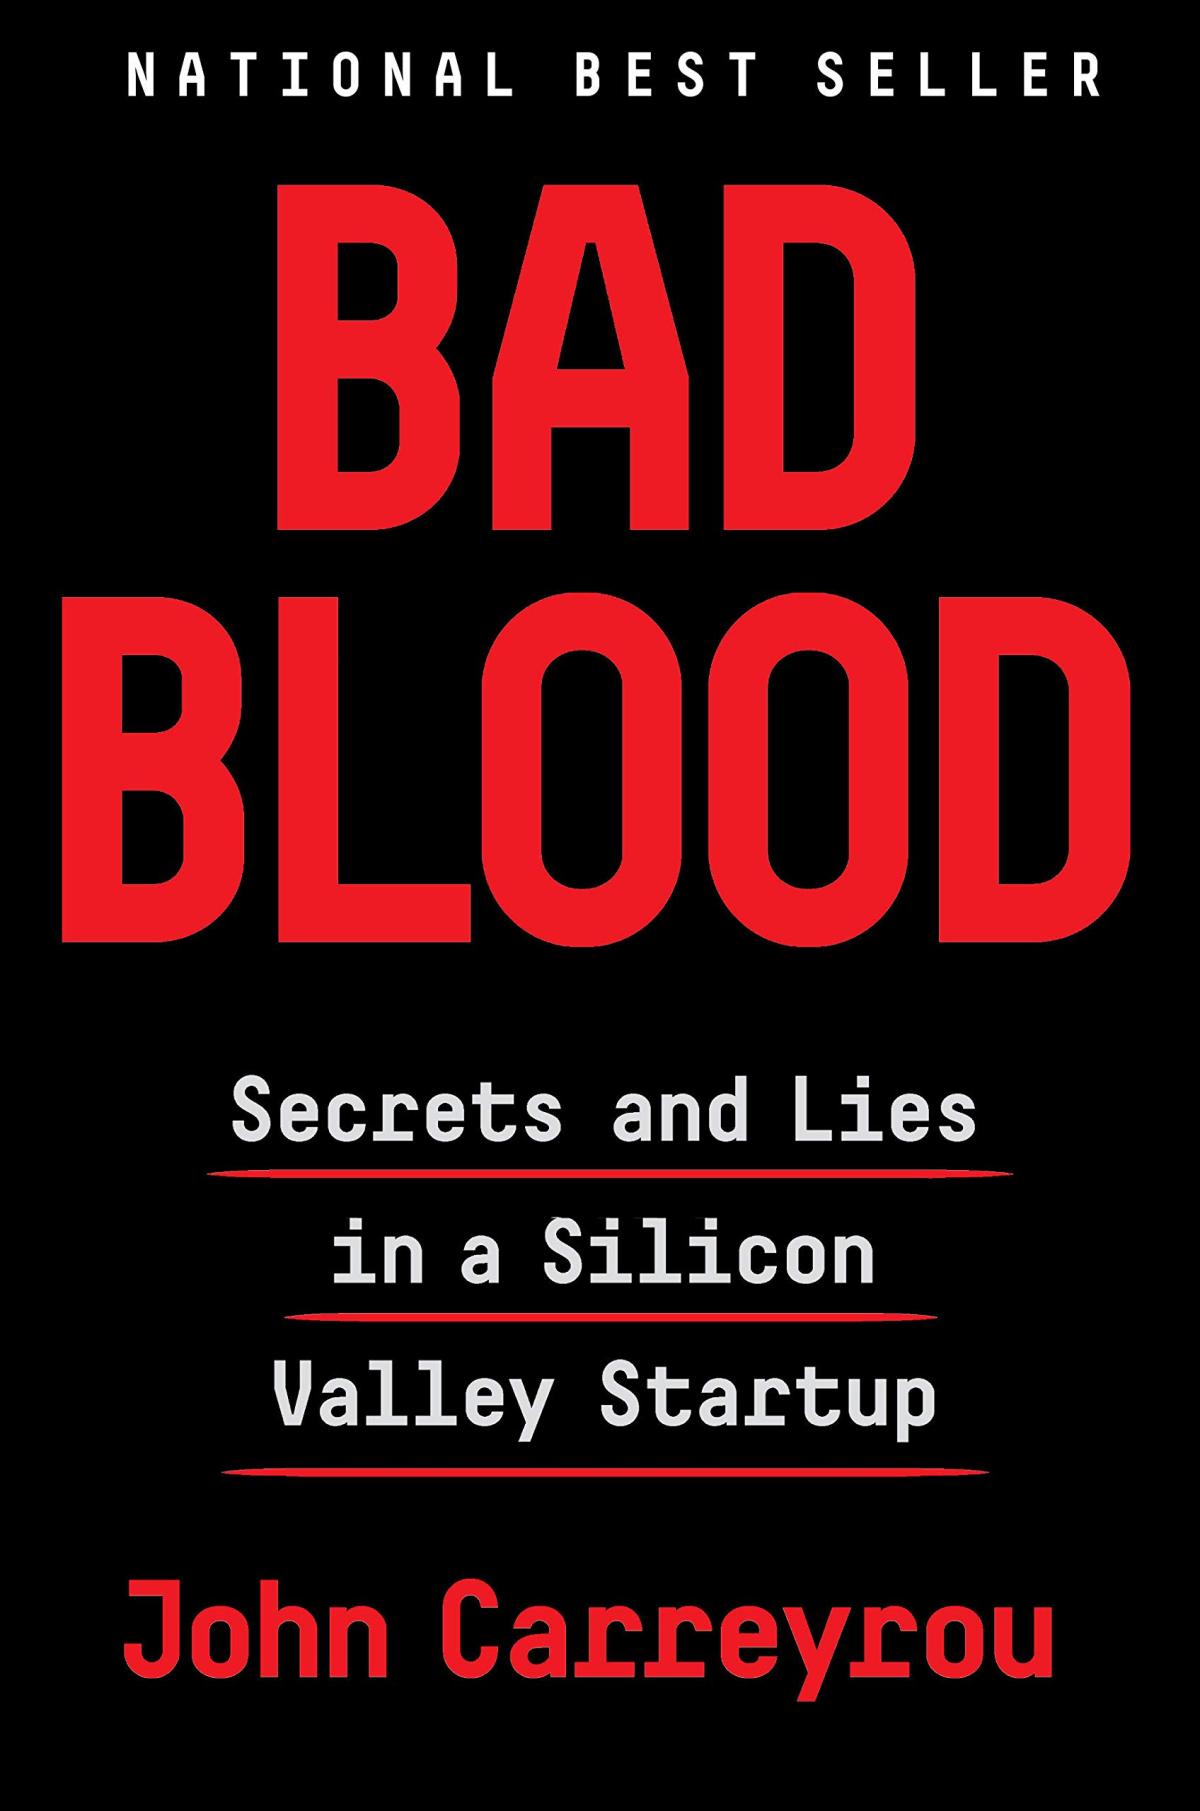 Cover of Bad Blood. The title and author's name are in red on a black background, while the subtitle is in white.